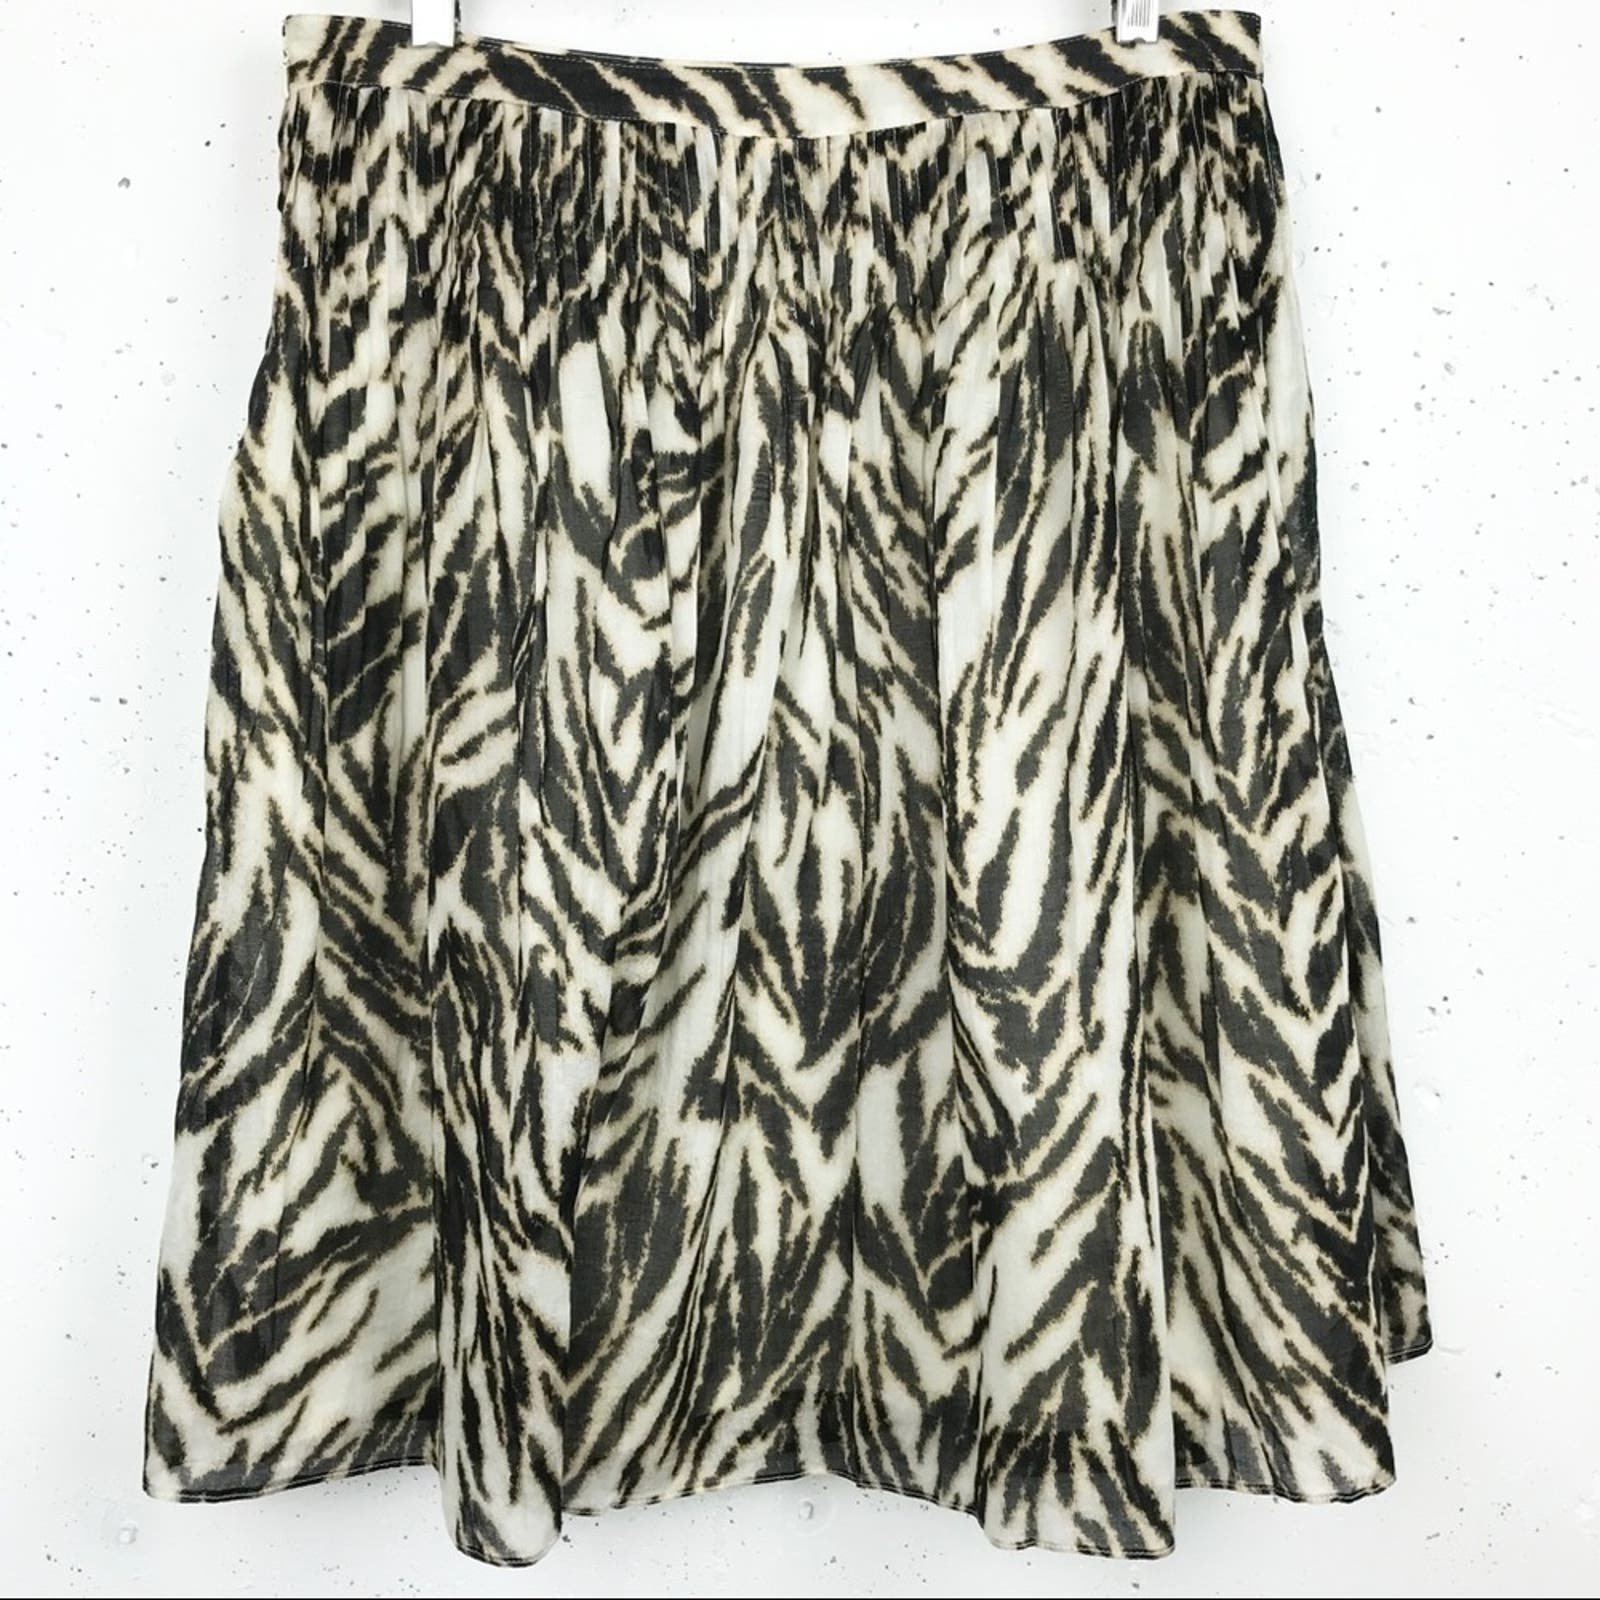 the Lowest price Talbots Tiger Print Cotton Pleated Skirt GhHqCpbPT hot sale